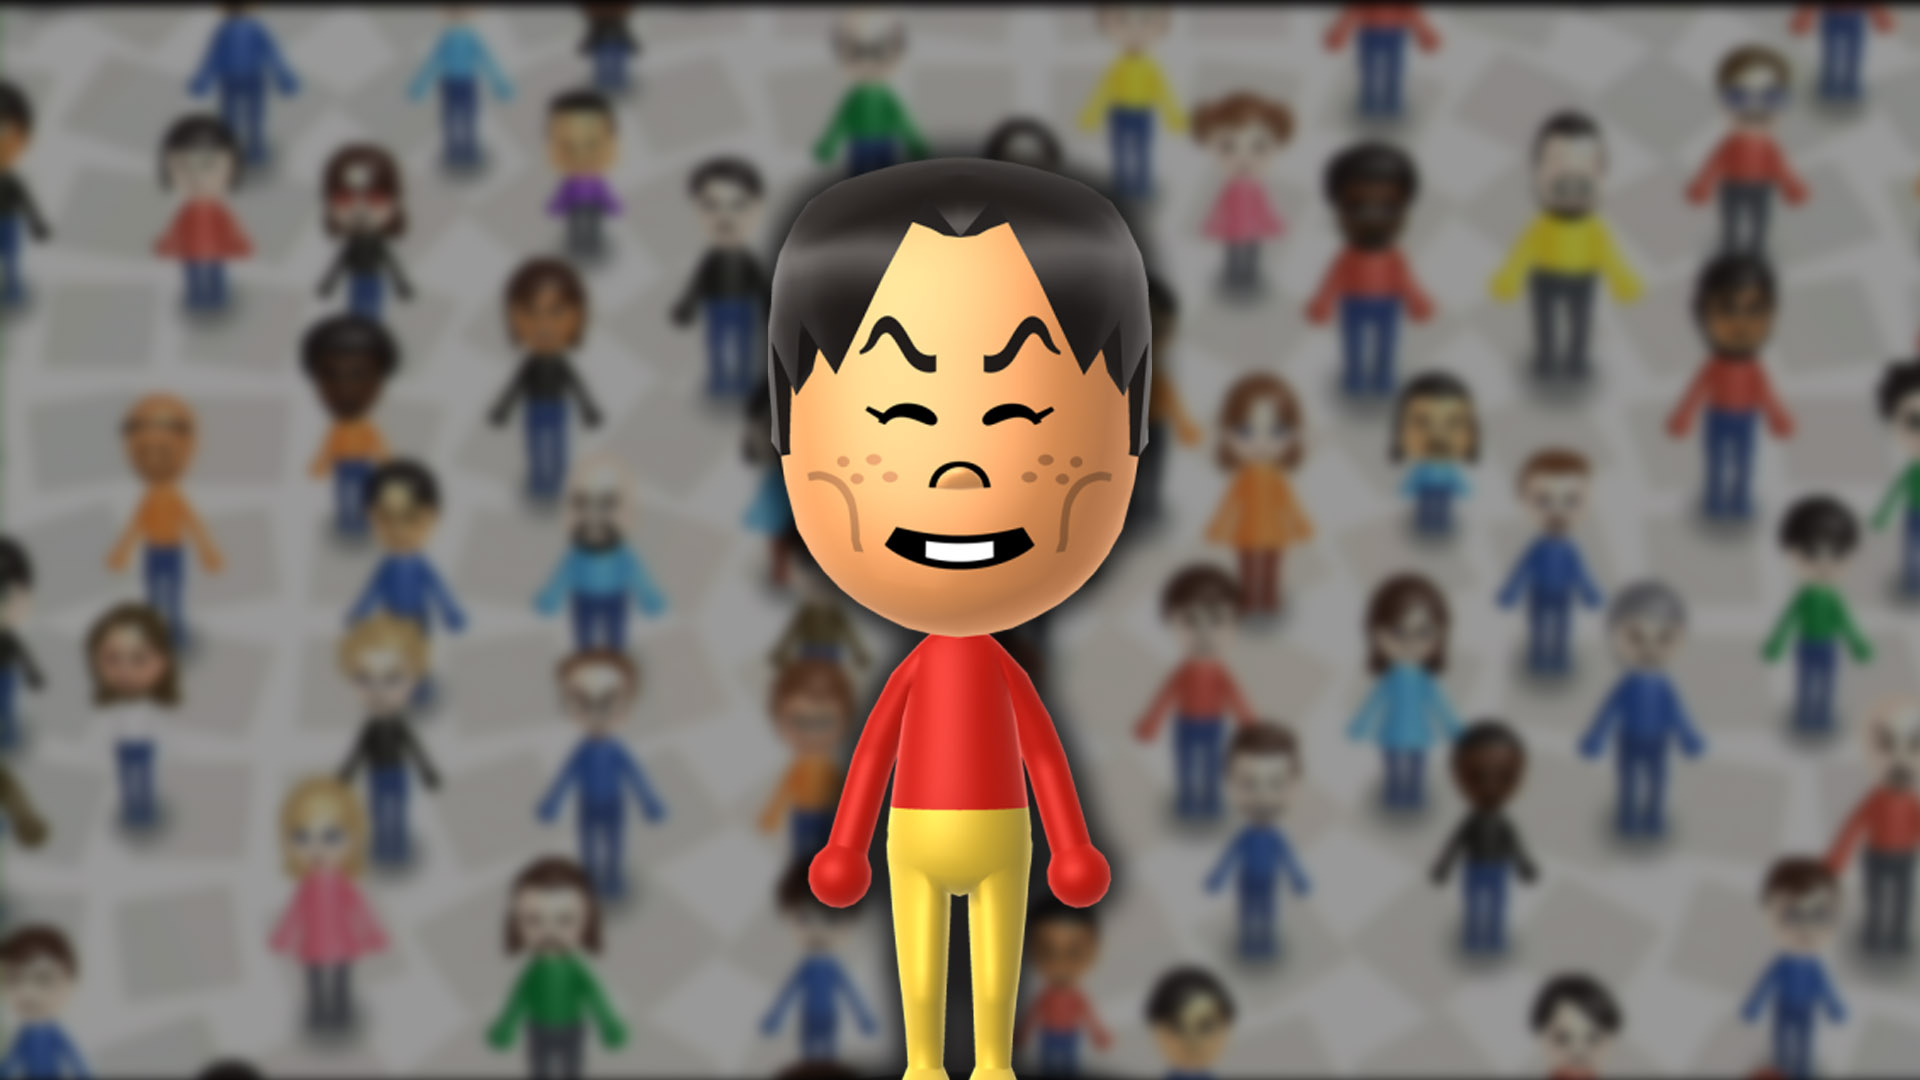 mii channel theme download